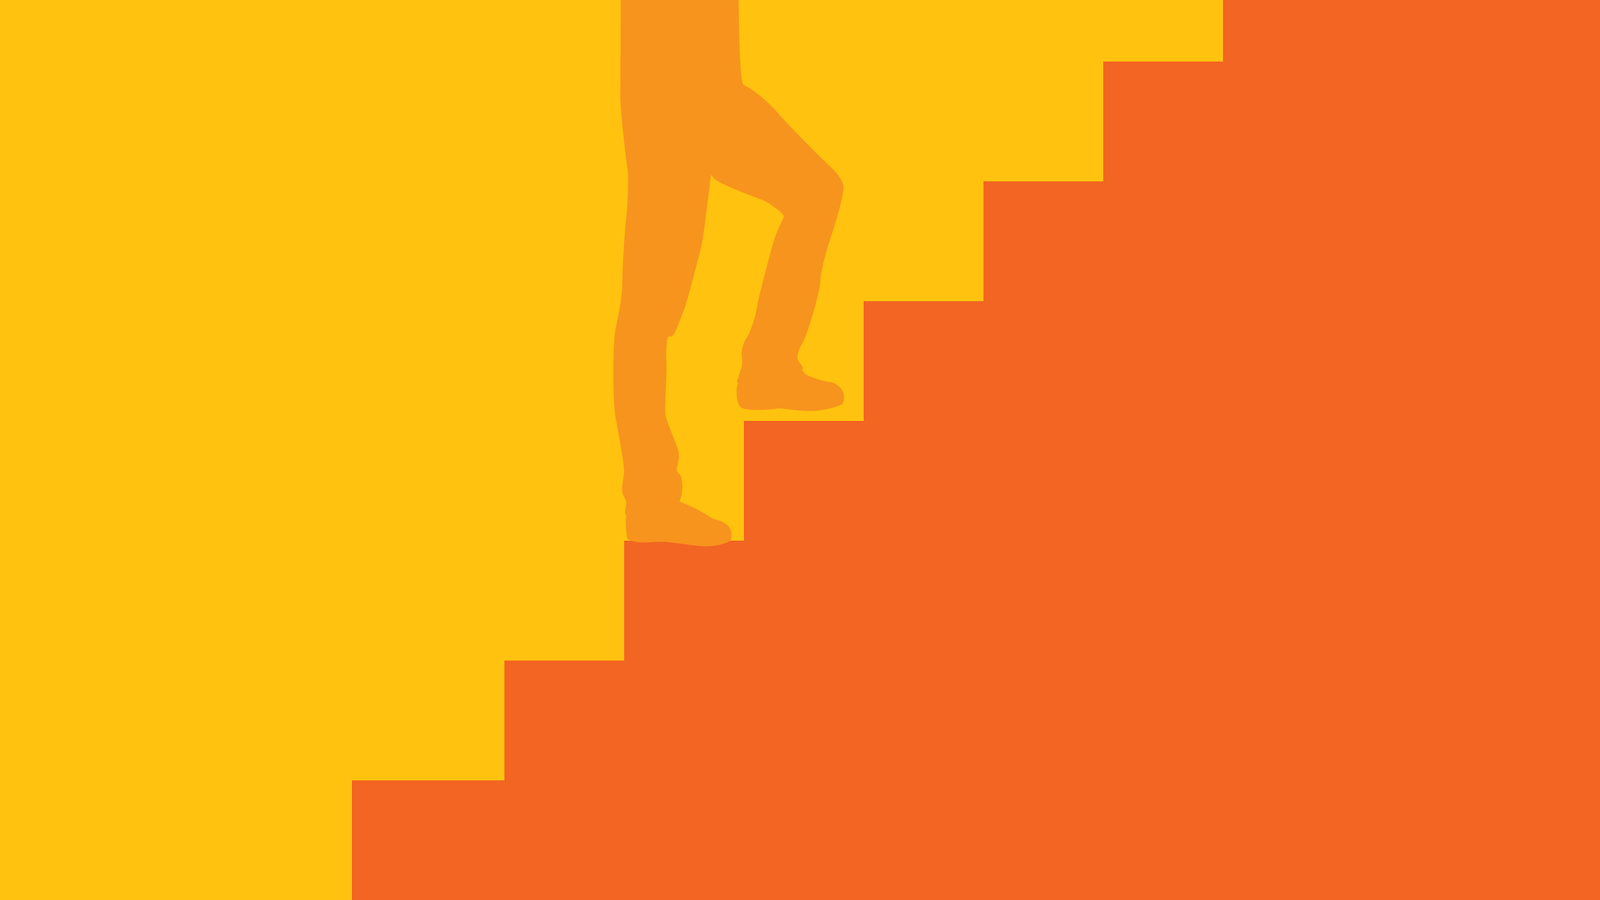 An illustration of a person walking up a flight of stairs